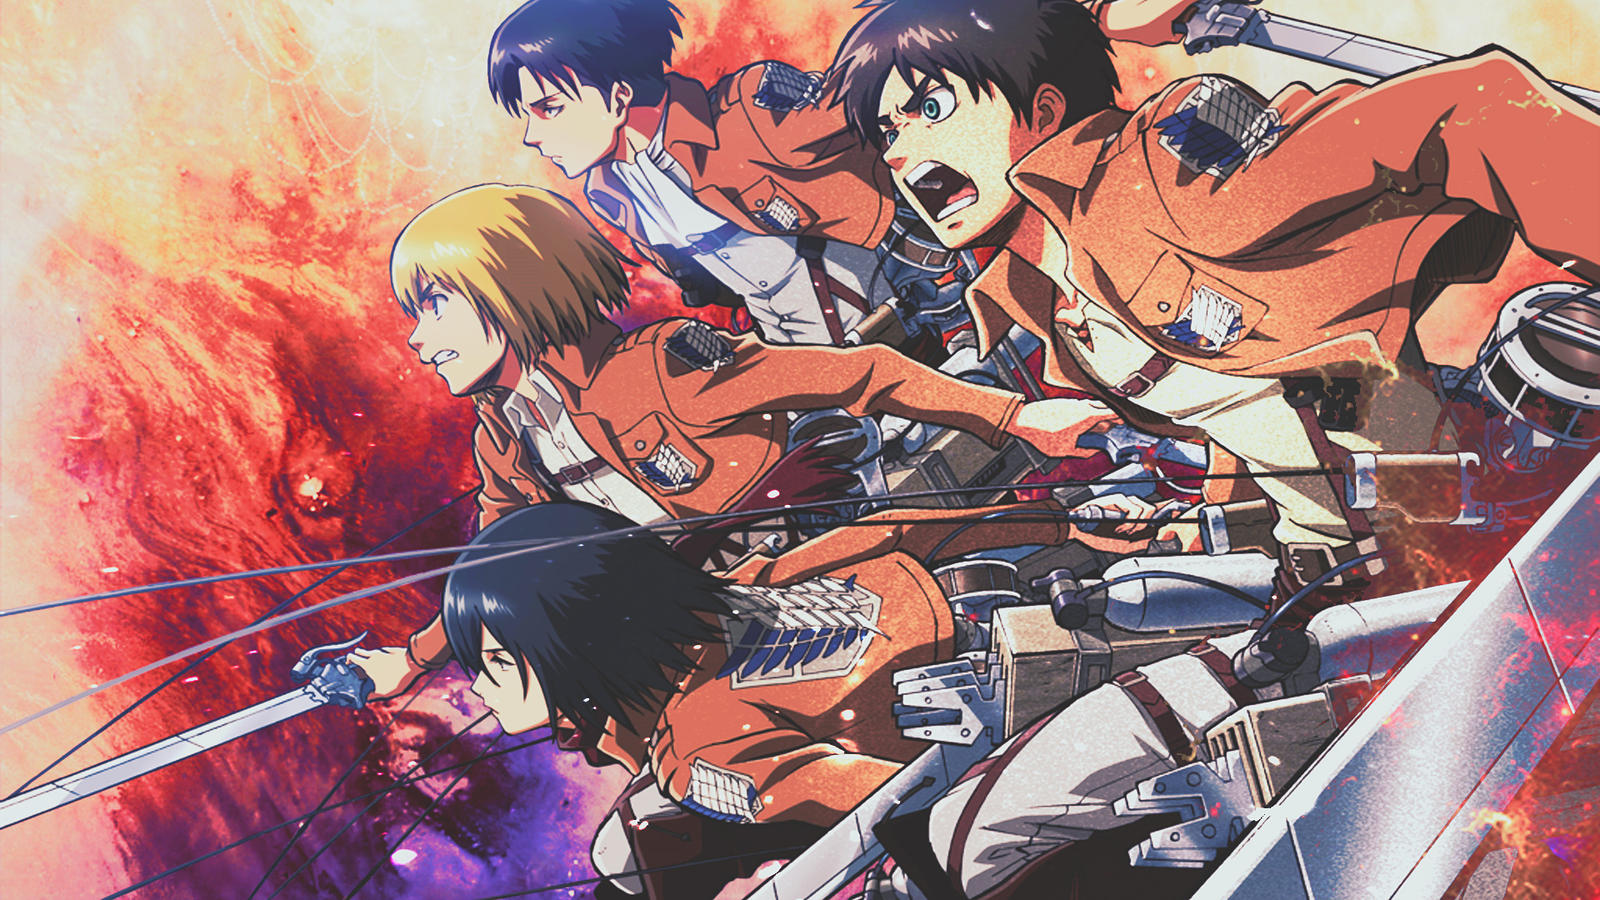 Wp5640993-attack-on-titan-anime-4k-pc-wallpapers by sabu110003 on DeviantArt